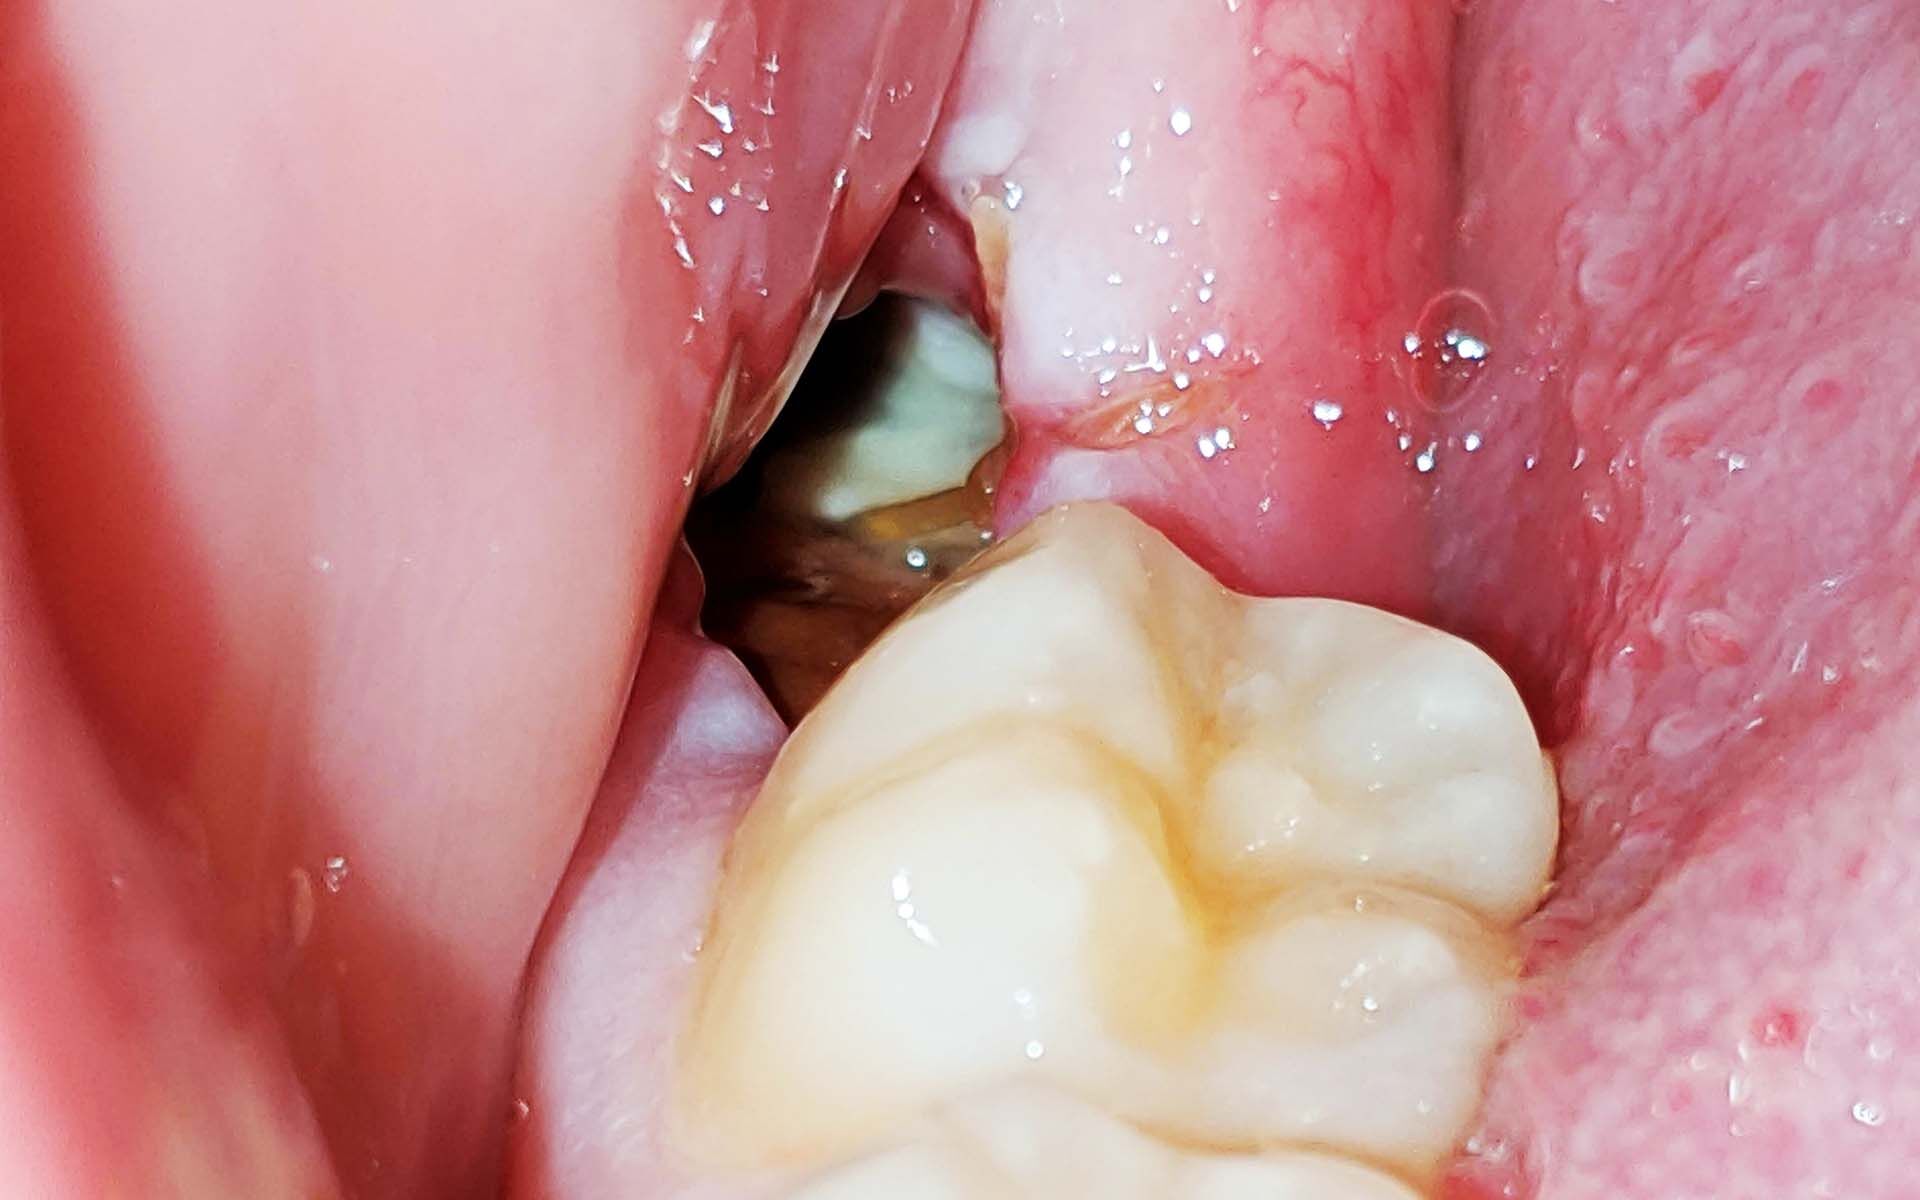 Is There A Hole After Wisdom Tooth Extraction